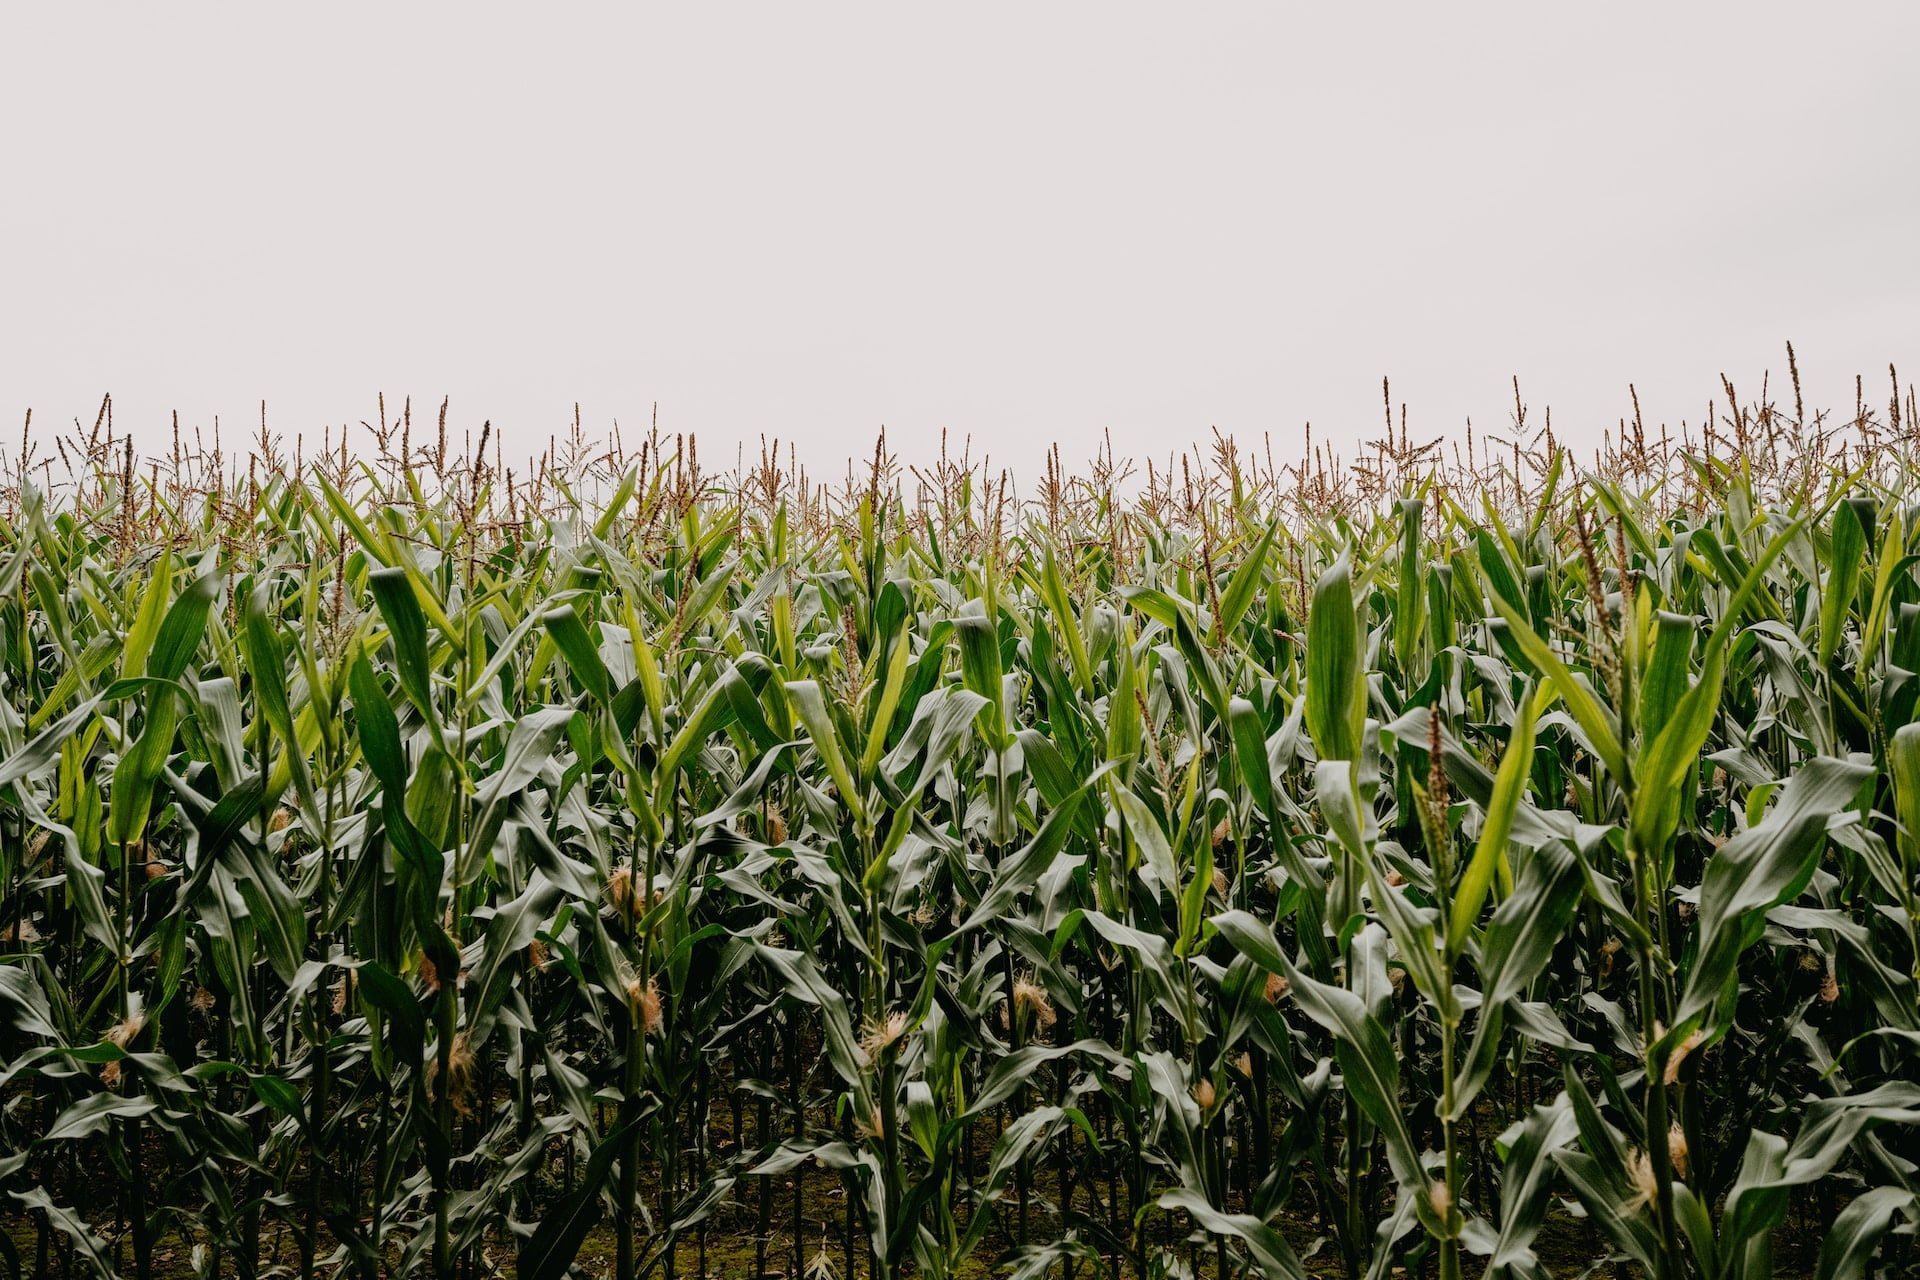 Depicts a field of corn. Used as a cover image in an overview article of AcreTrader, the farmland investment platform.